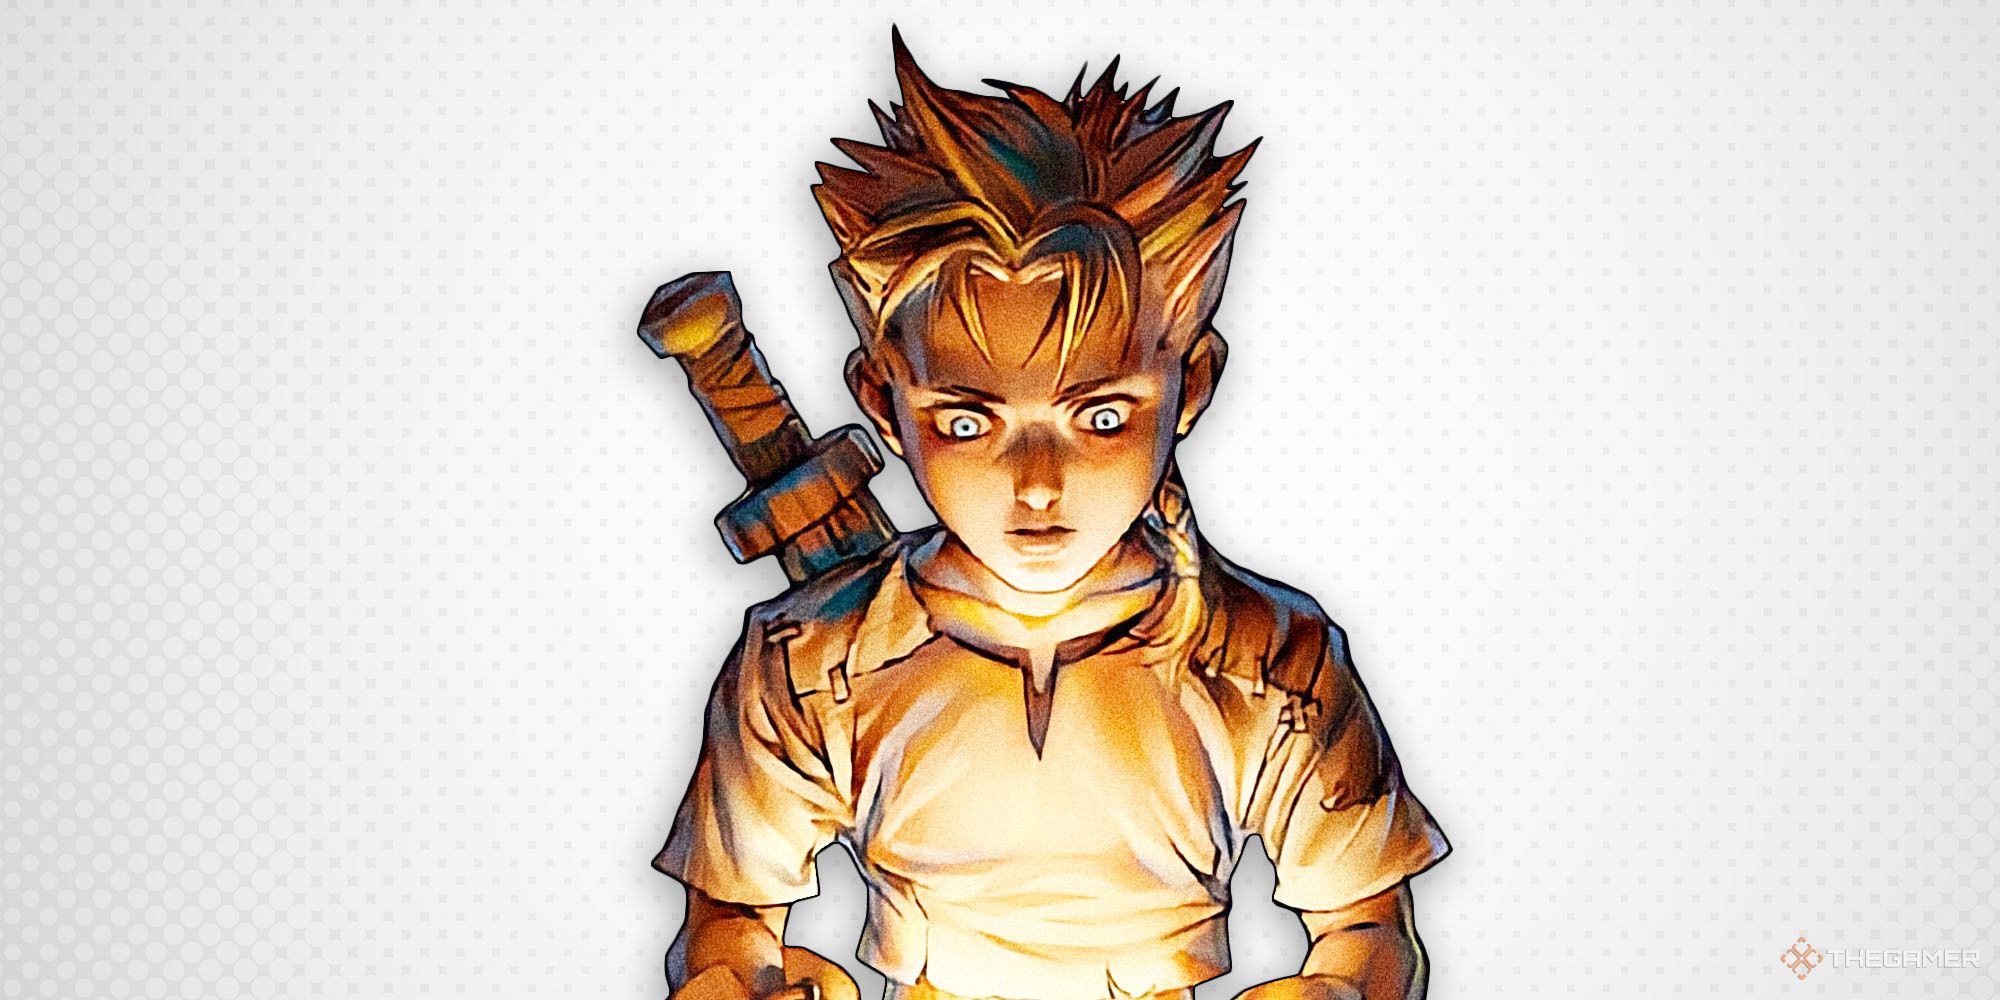 The cover art of the first Fable game on a white background. The box art depicts a child looking down towards a glowing light, with a wooden sword on his back. 